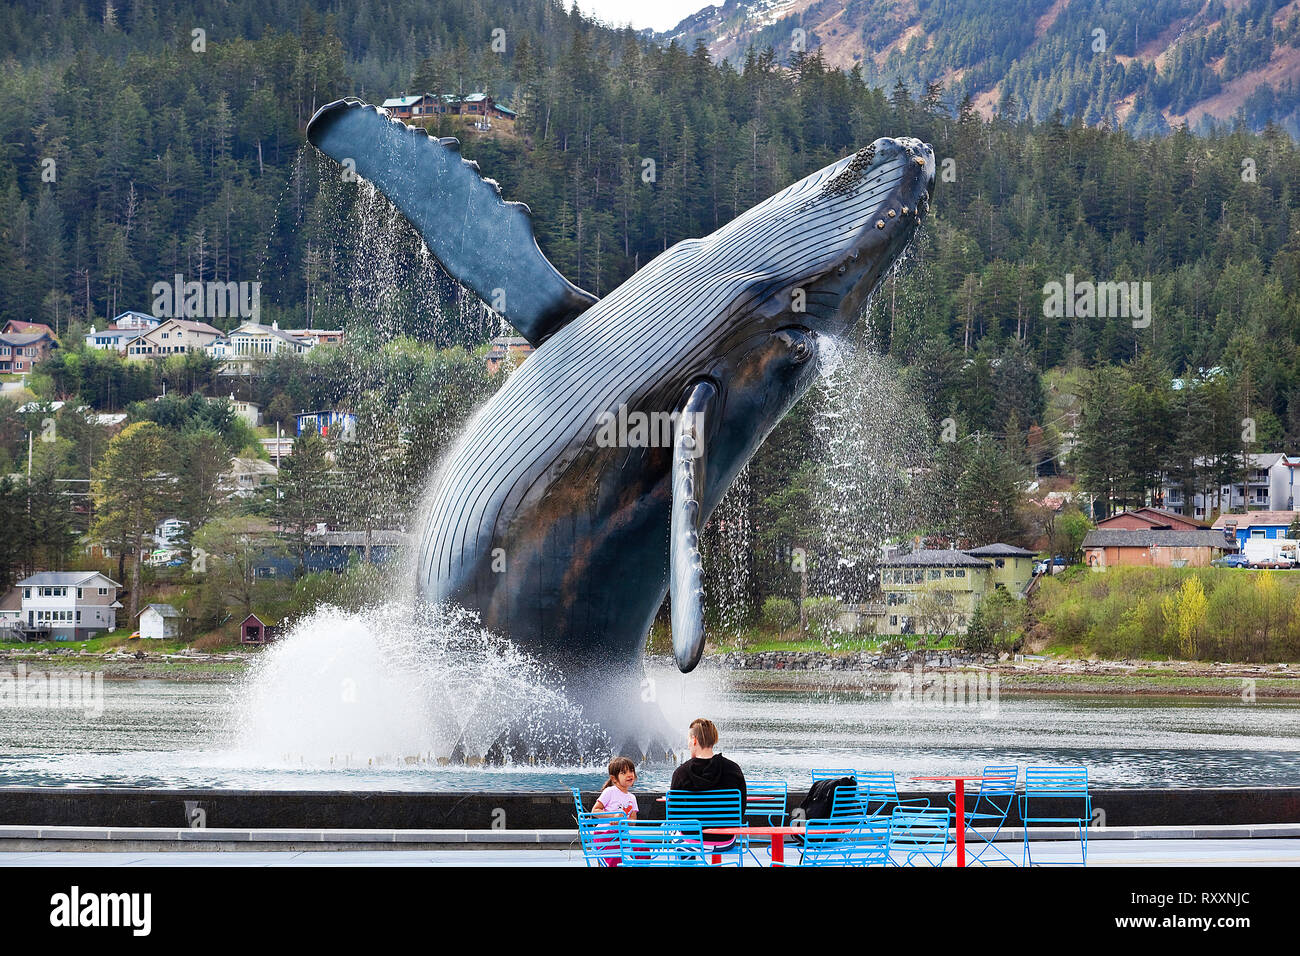 Full-scale statue of a breaching humpback whale in Mayor Bill Overstreet Park. The sculpture is by artist Skip Wallen and is set in a fountain alongside the Juneau waterfront, Alaska, USA Stock Photo